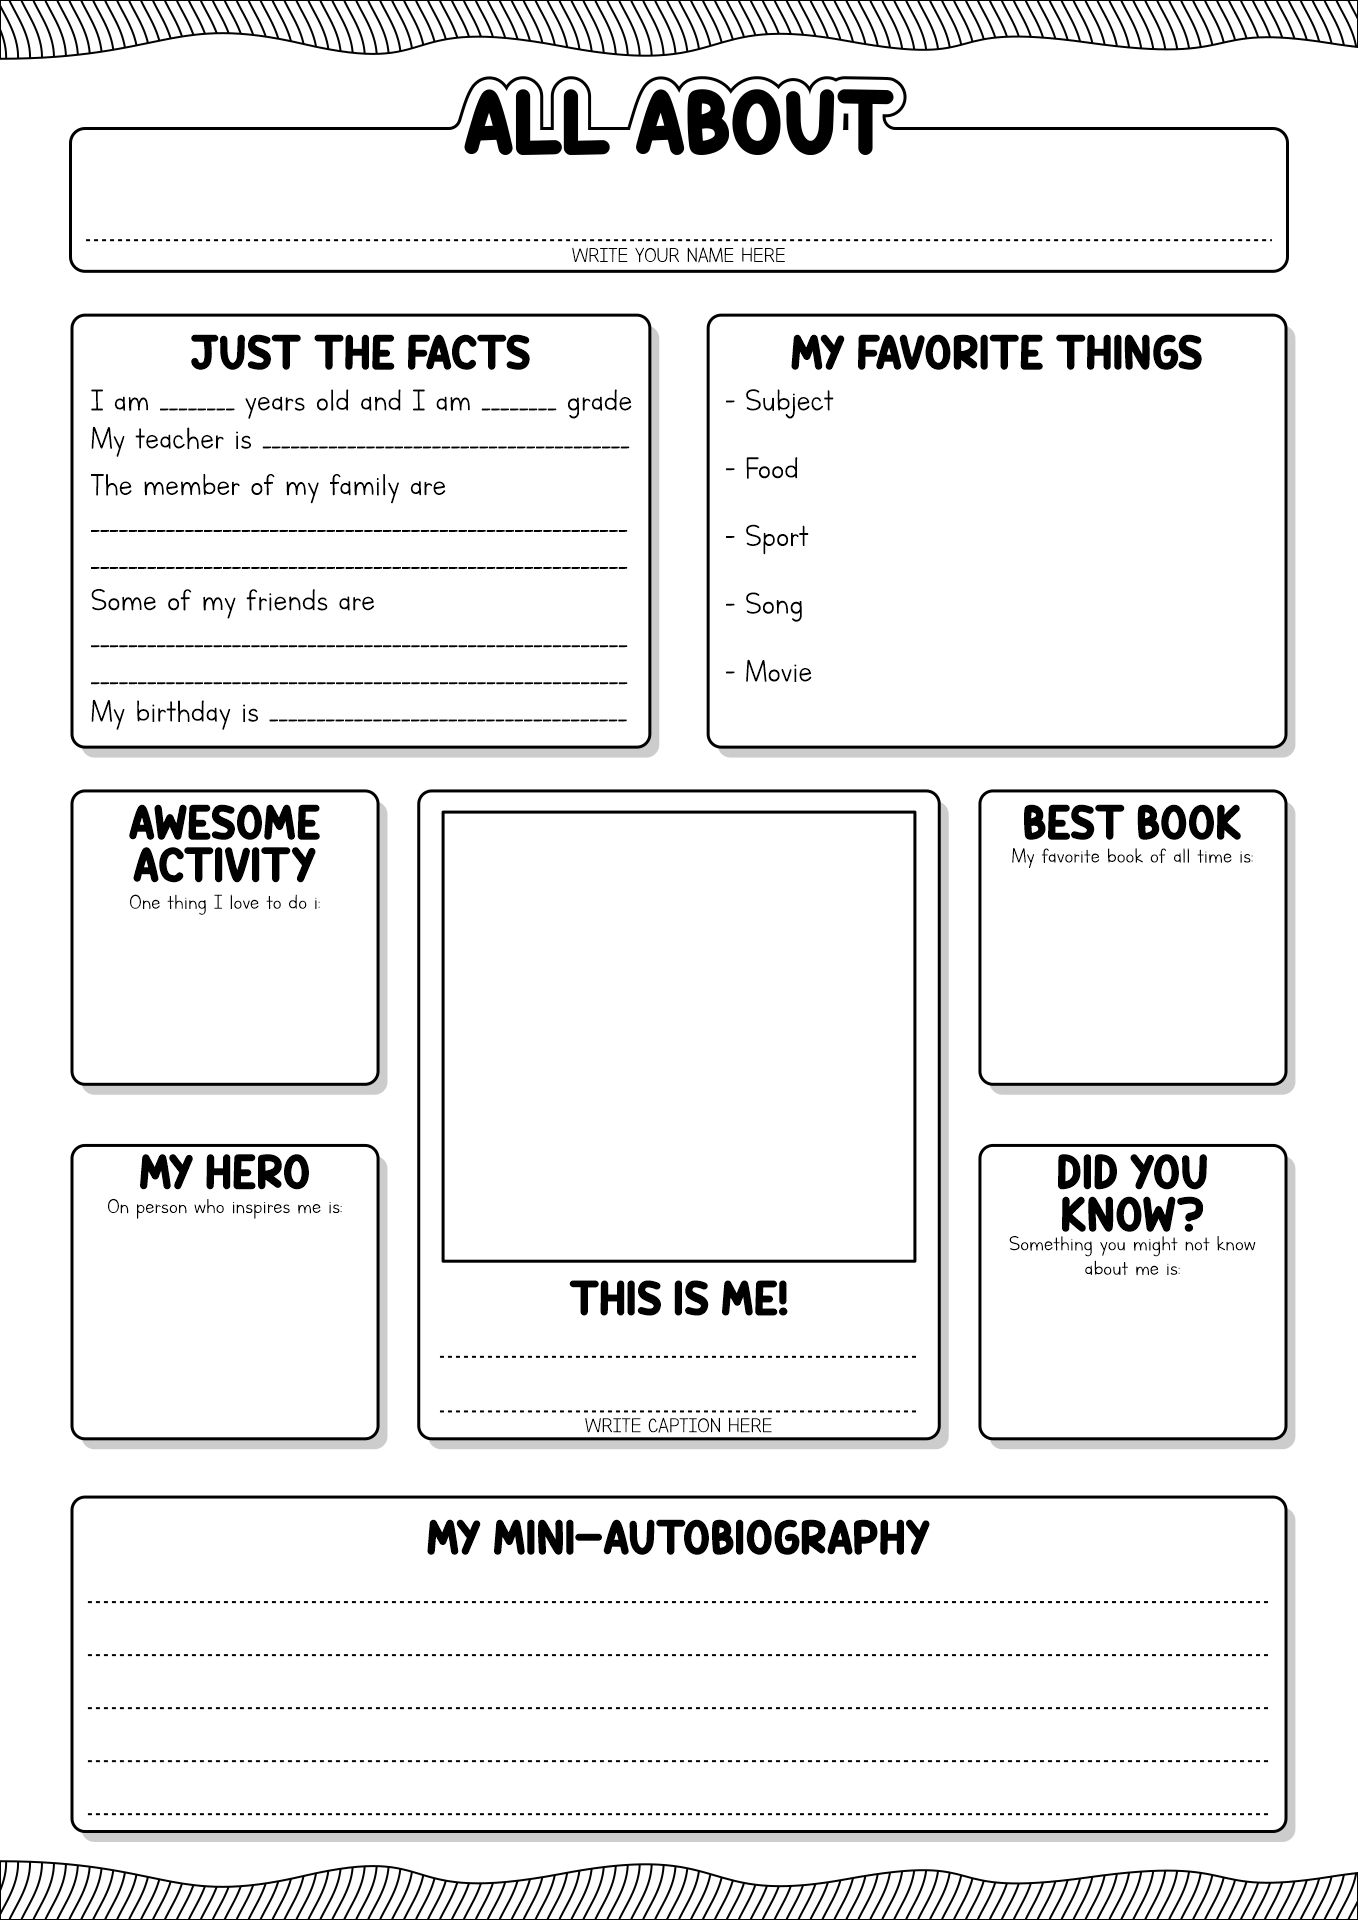 13-best-images-of-get-to-know-me-worksheet-get-to-know-you-worksheet-getting-to-know-me